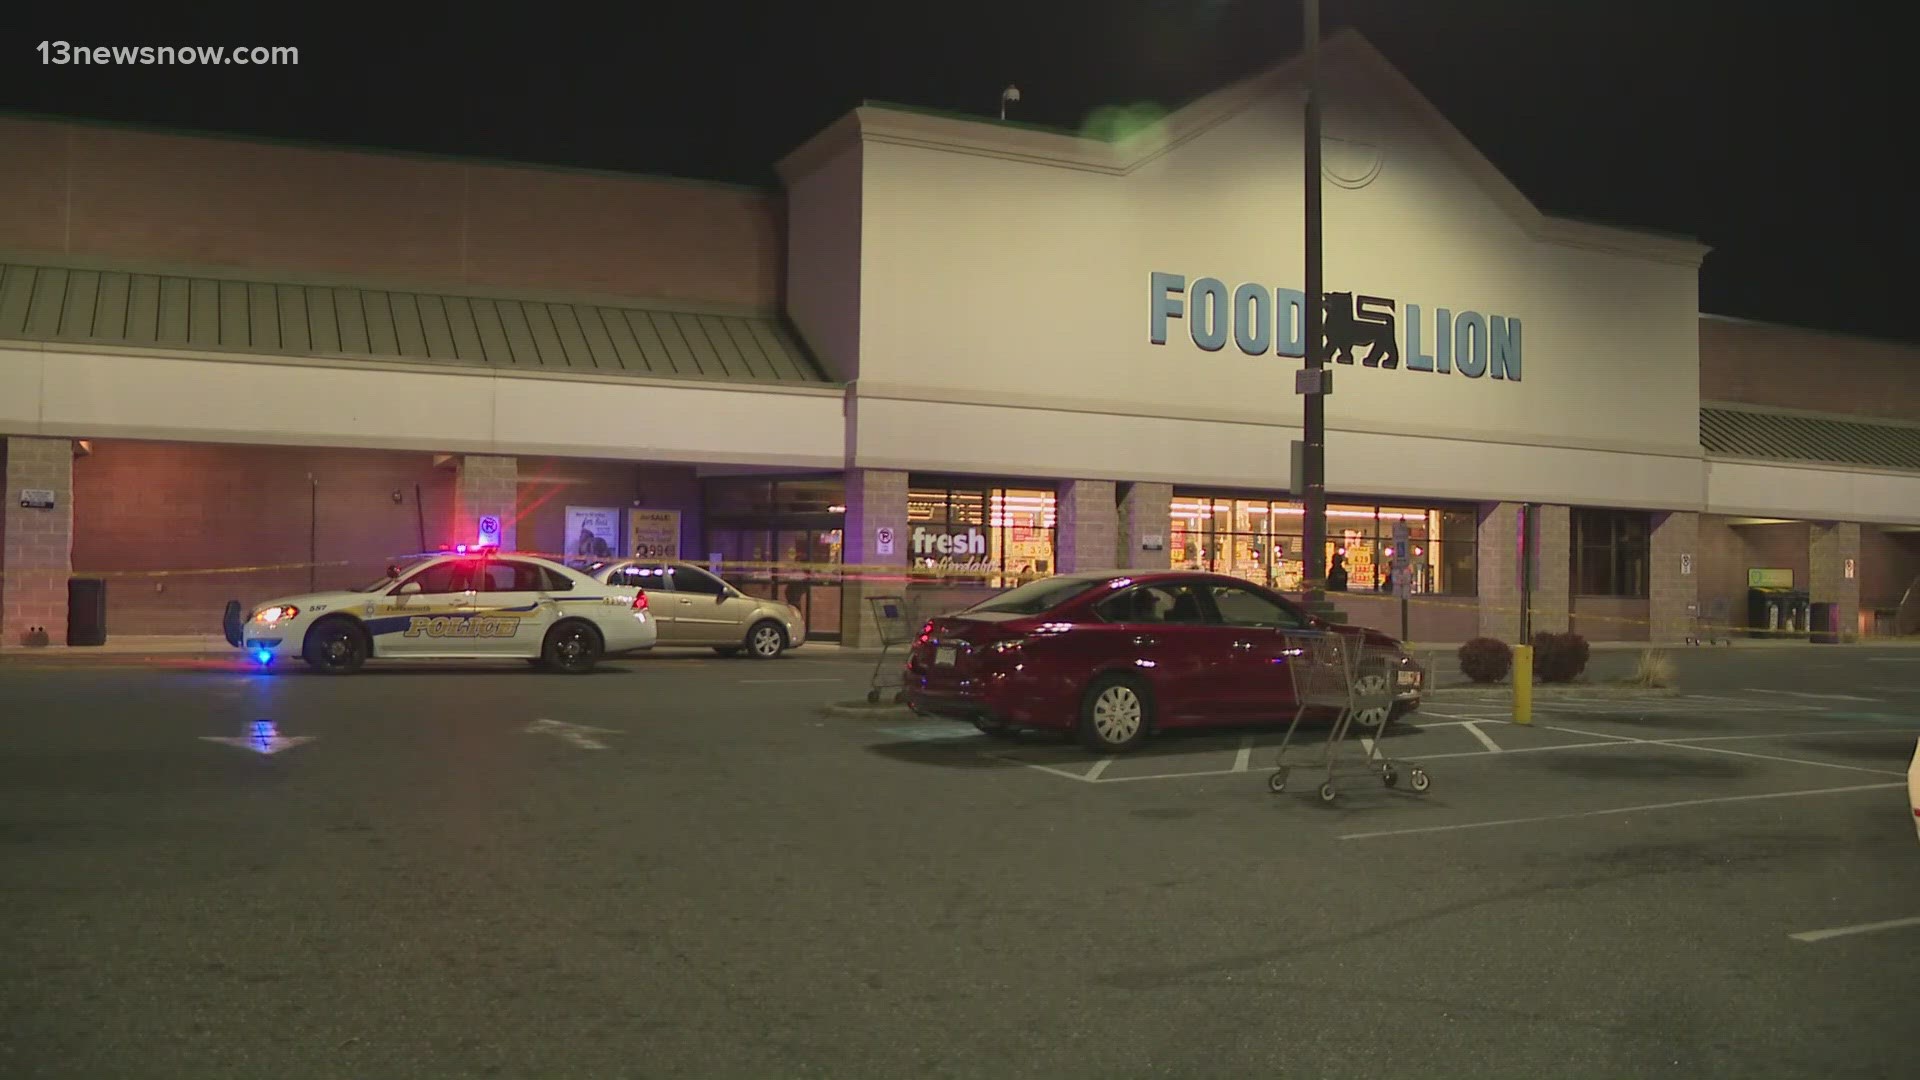 The incident happened at the grocery store on London Boulevard, according to the Portsmouth Police Department.